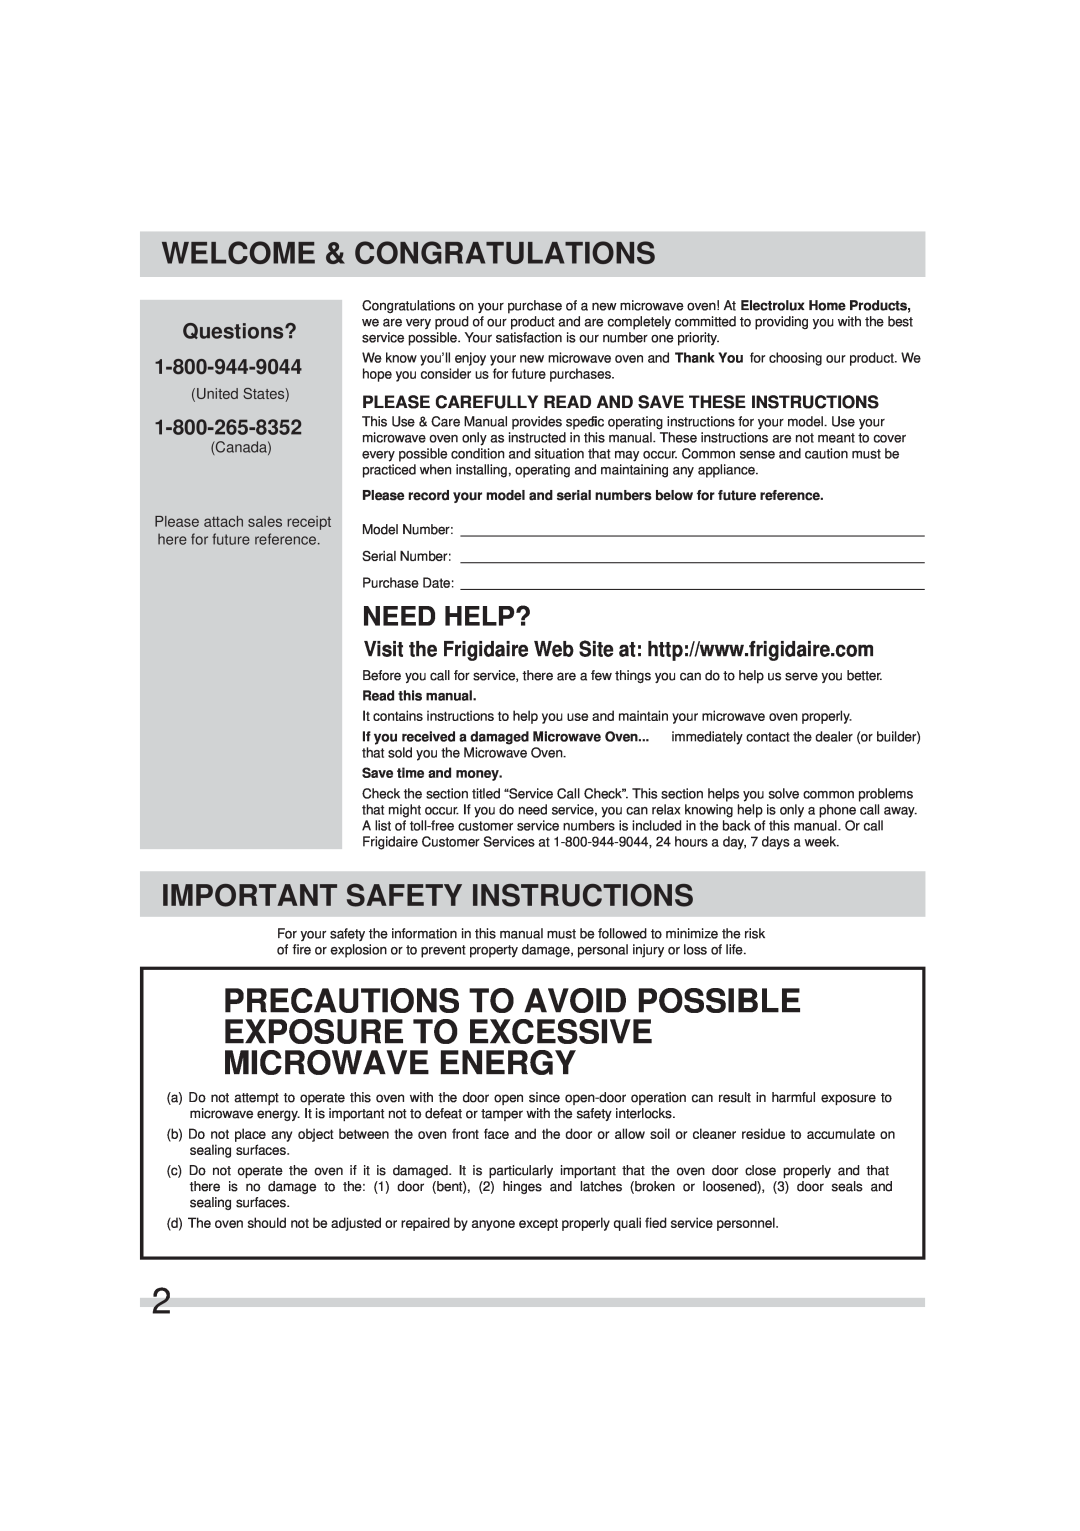 Frigidaire FFMV152CLW, FFMV154CLS, FFMV152CLB Welcome & Congratulations, Important Safety Instructions, Need Help? 